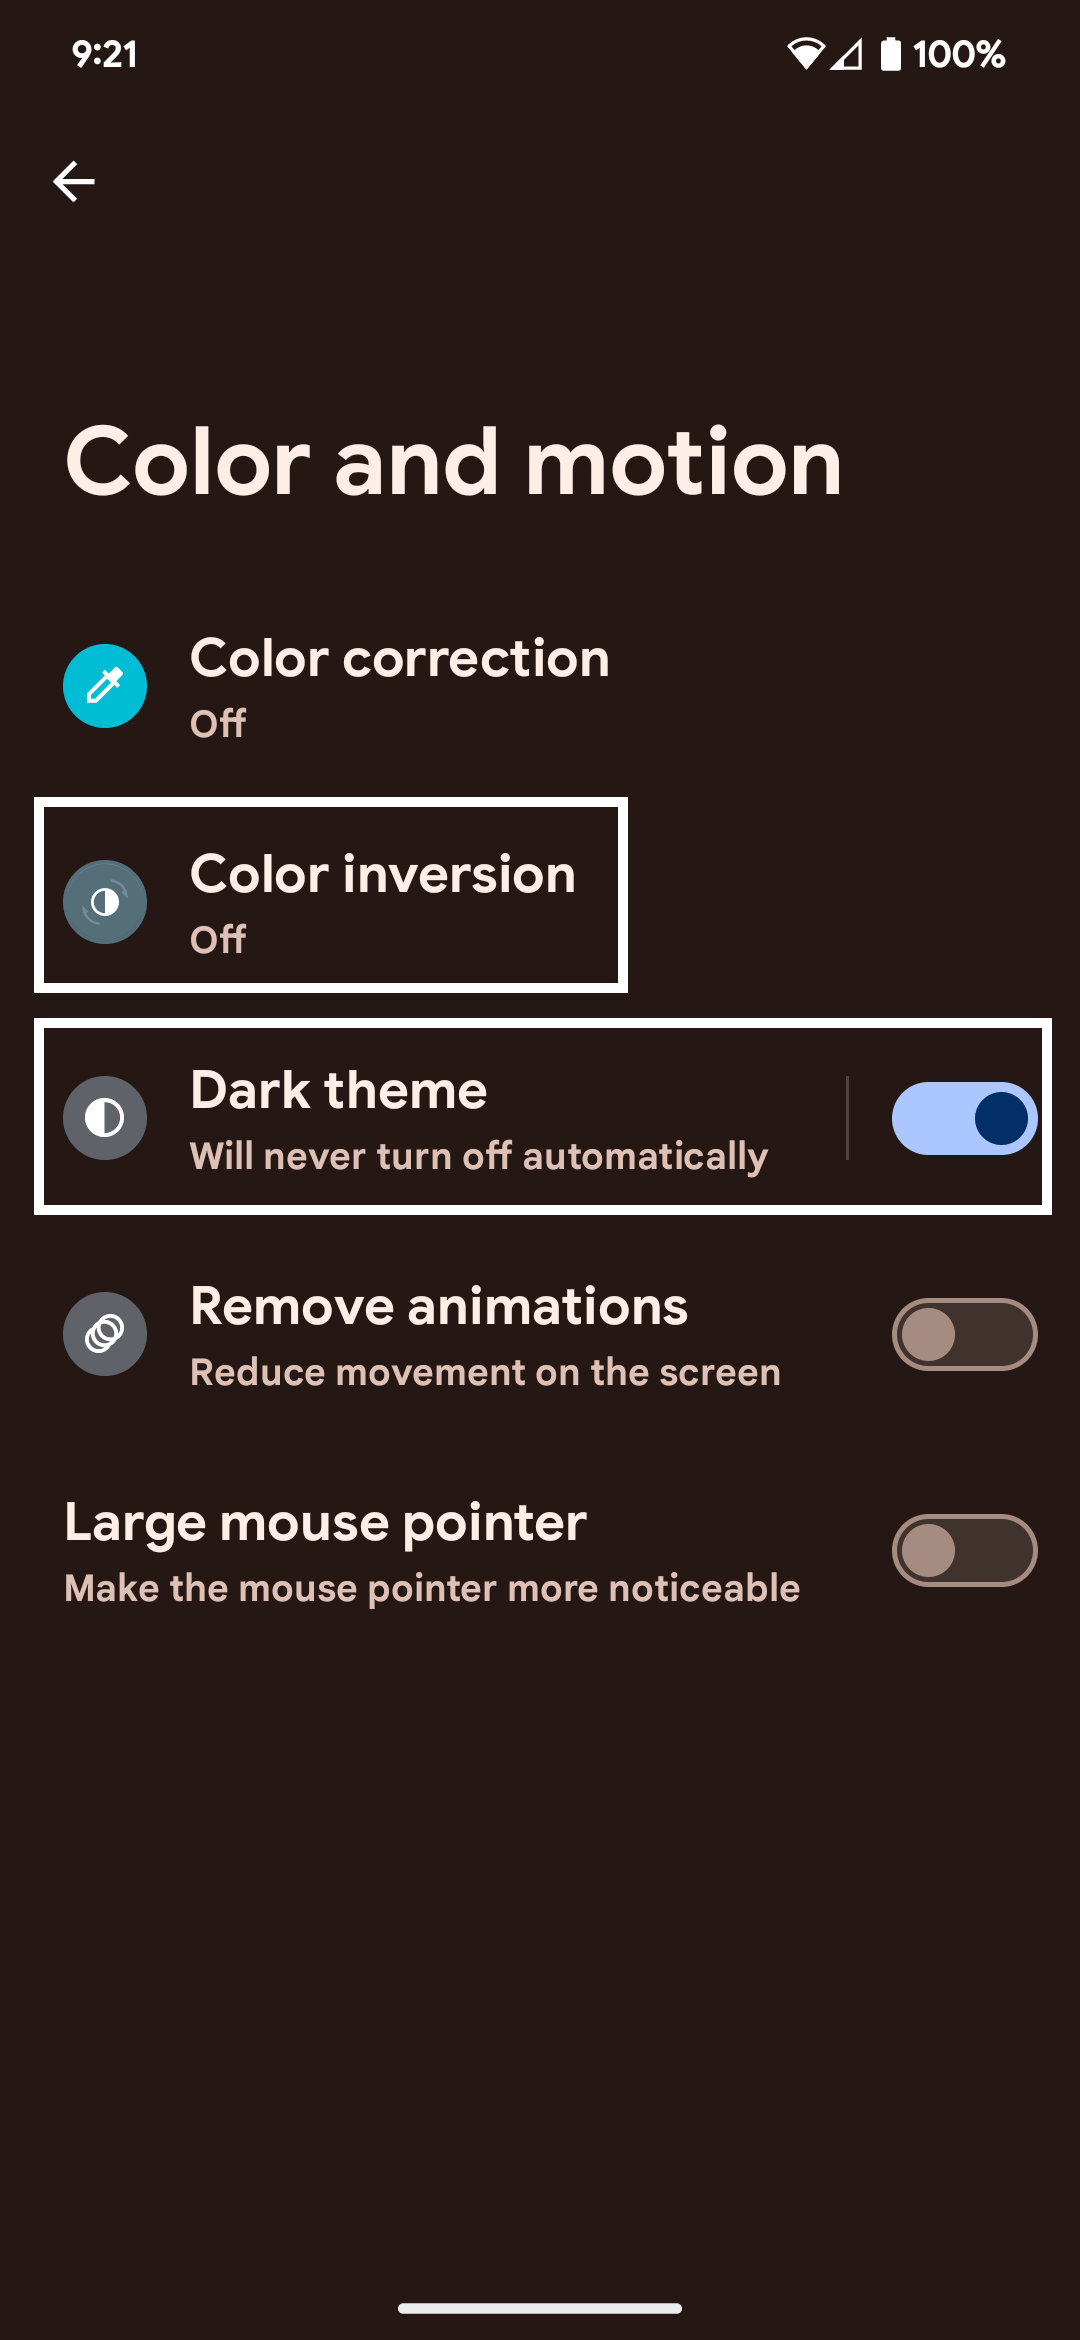 Screenshot of Android Color settings. Dark theme is toggled on and the color inversion setting is emphasized with a white box.